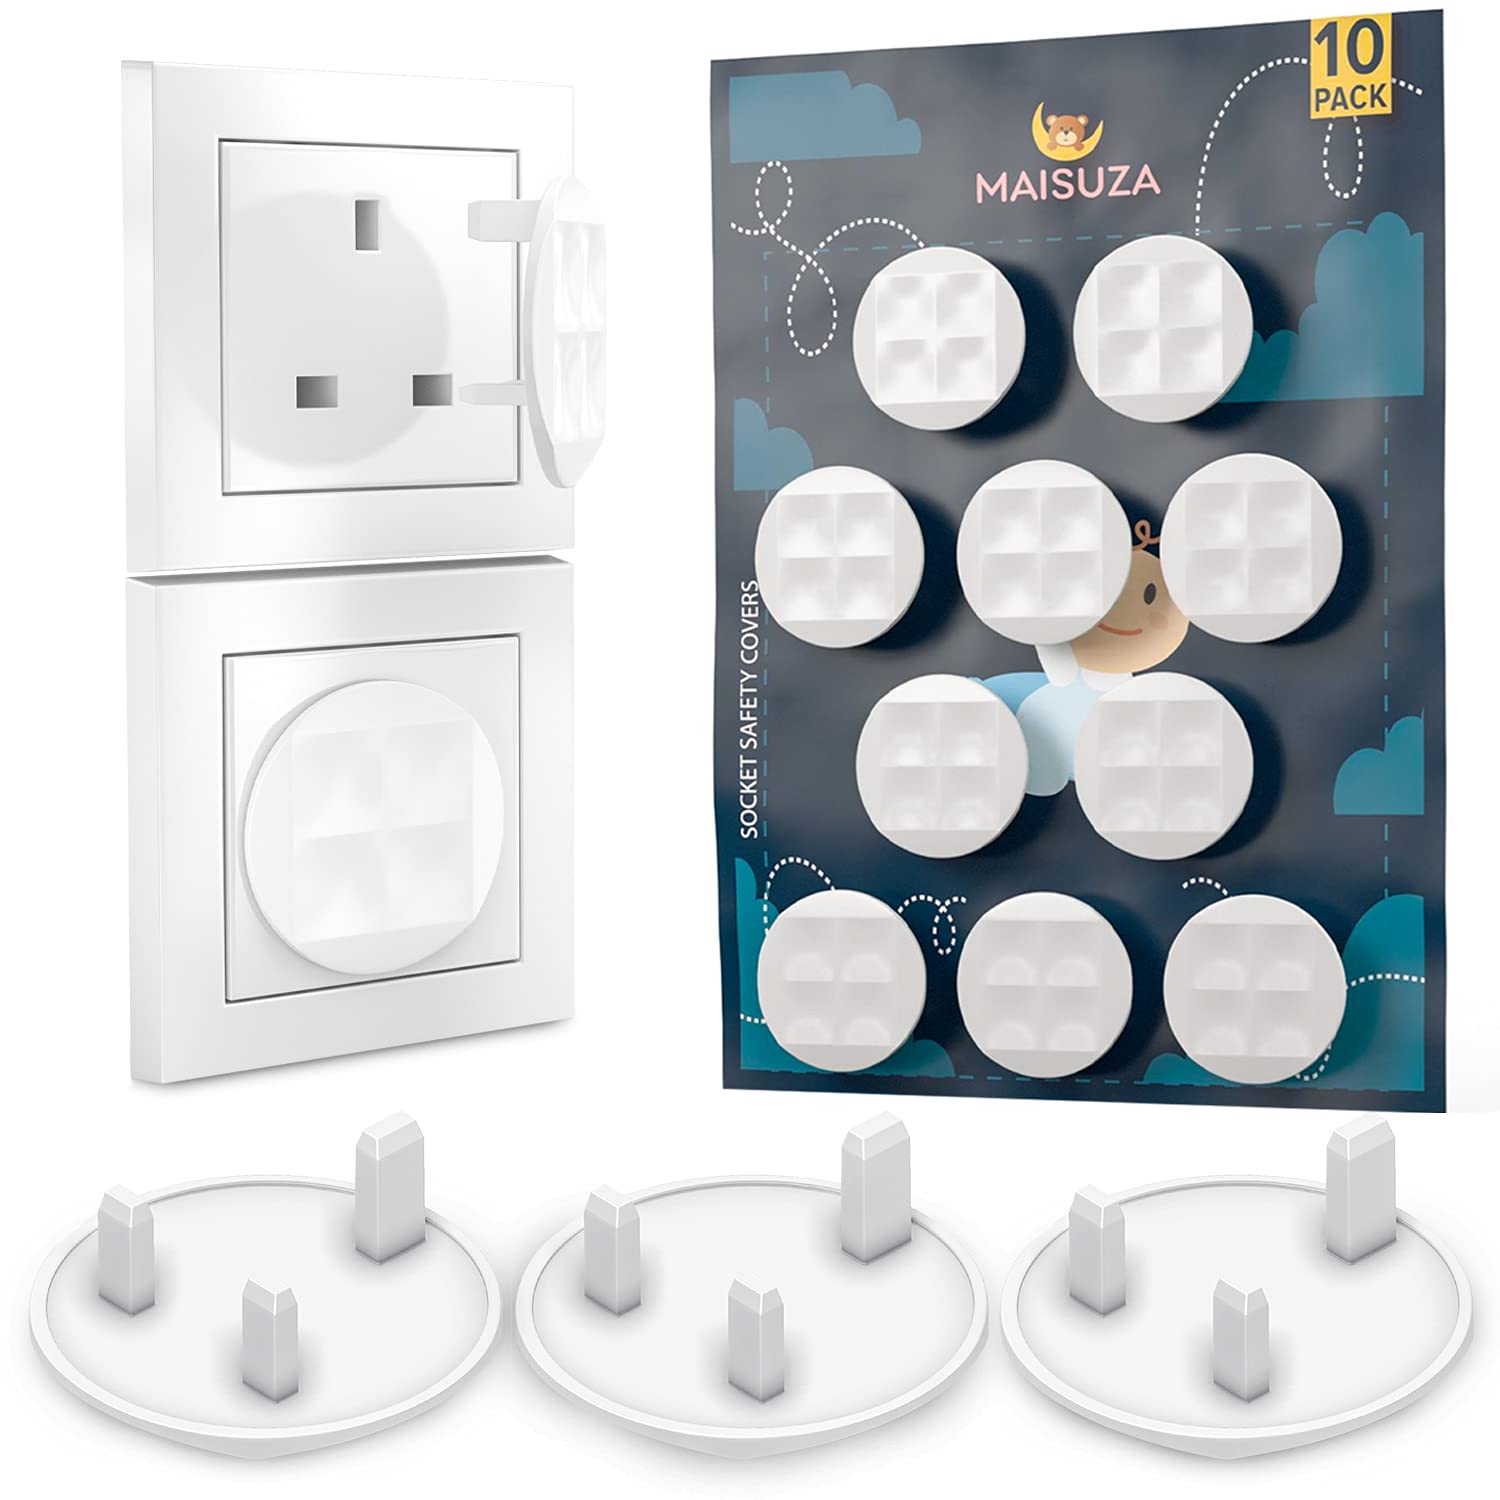 Plug Socket Covers UK – Pack of 10 White Tight Grip Socket Protector/guards for Unused Electrical Outlets – Perfect for Baby Safety at Home & School